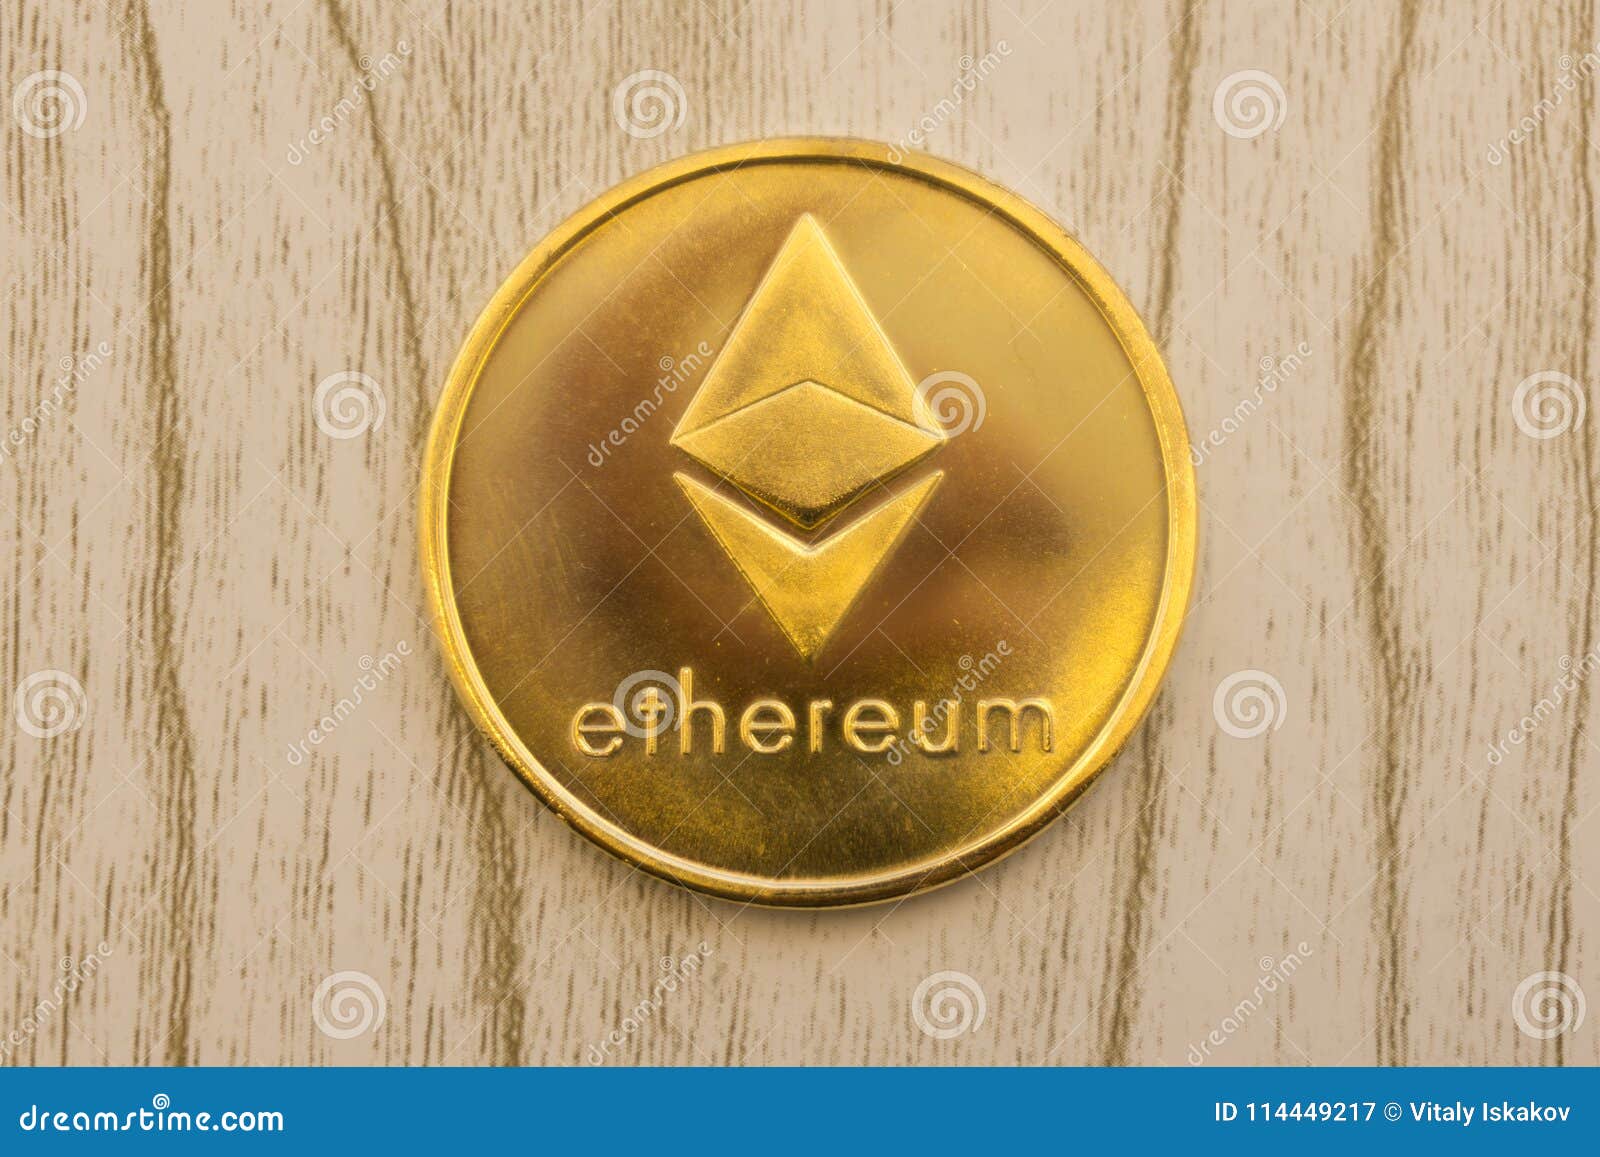 Ethereum Coin On Exchange Charts . Stock Image - Image of ...